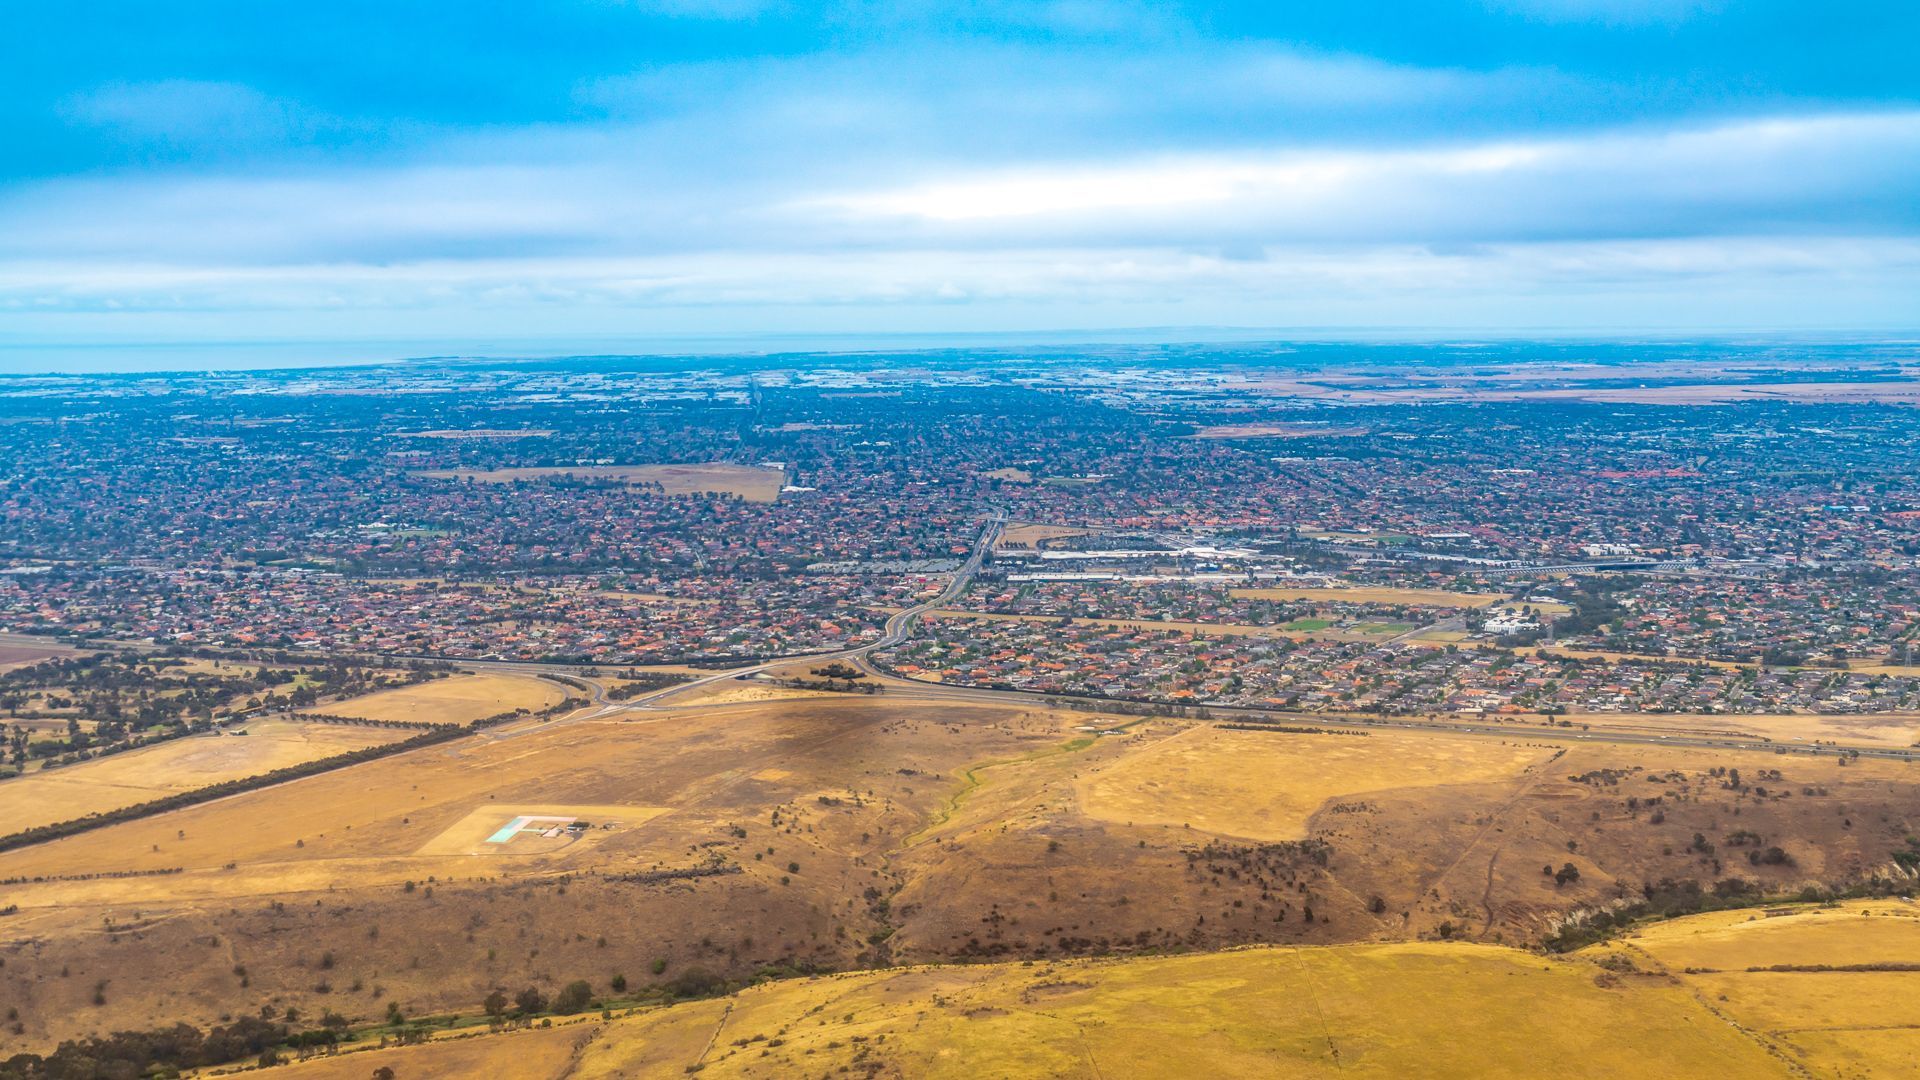 Ariel view of Melbourne's Western Suburbs